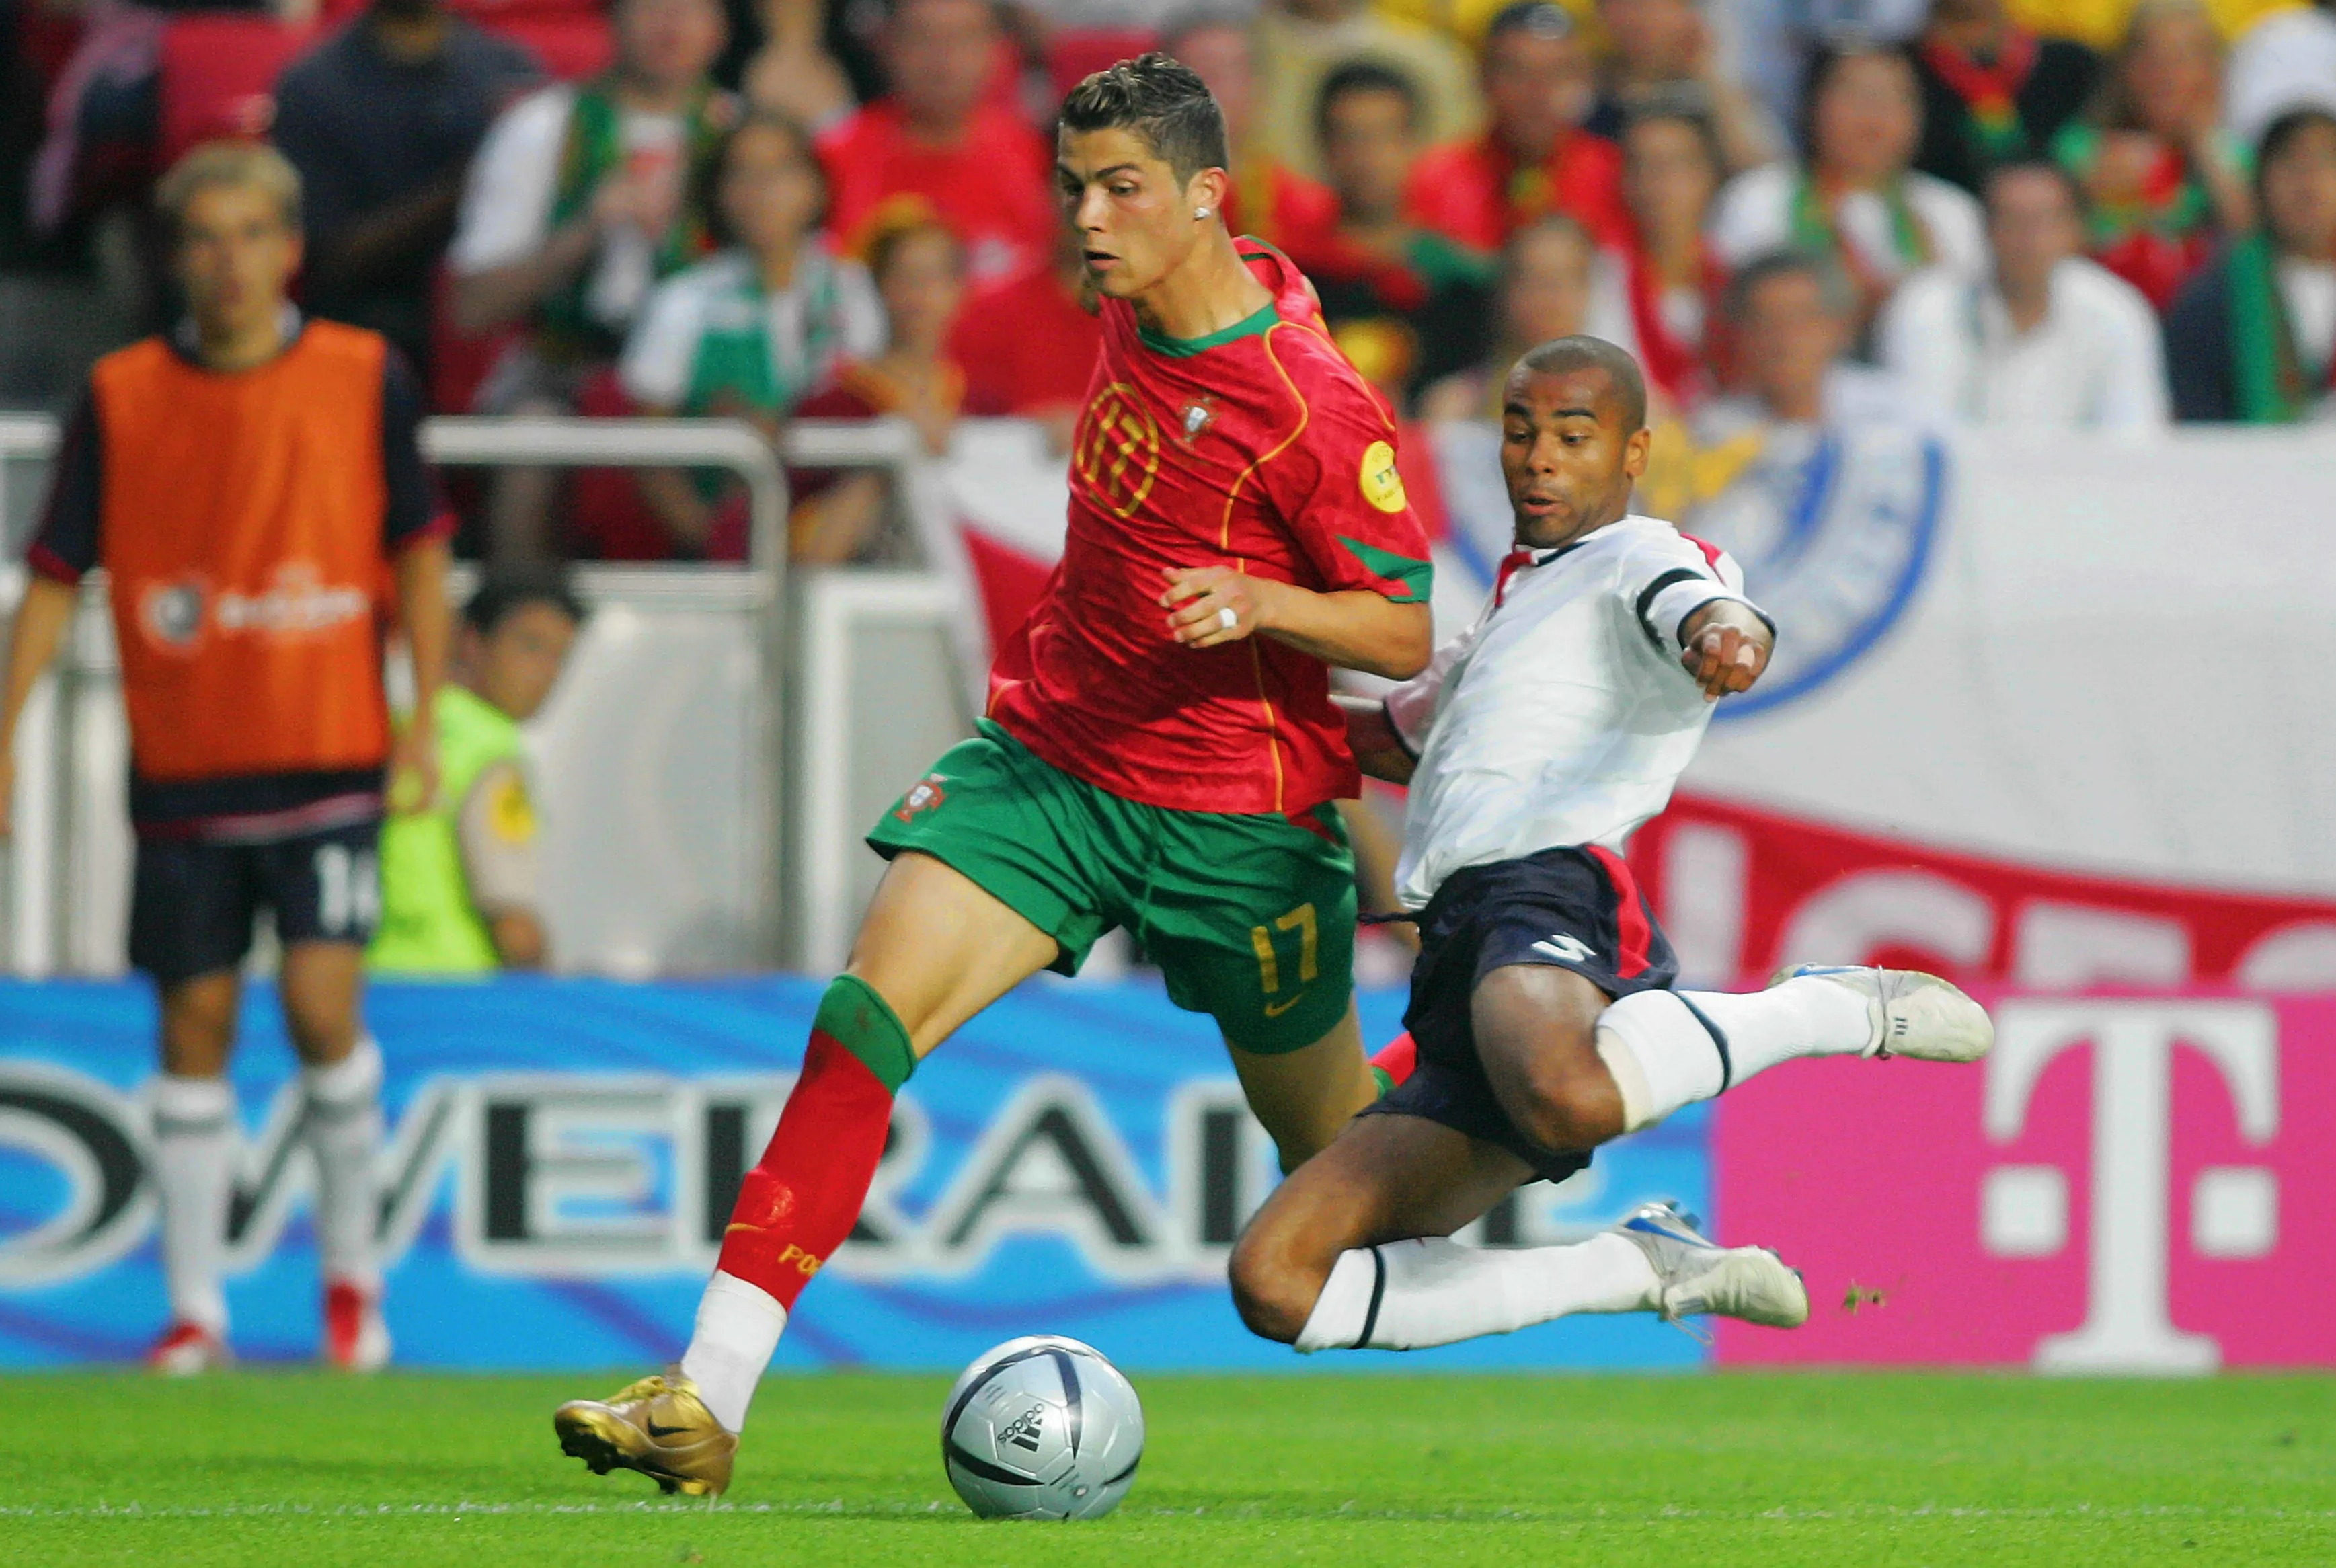 Paim and Ronaldo went to Brazil just weeks before the latter shone at Euro 2004